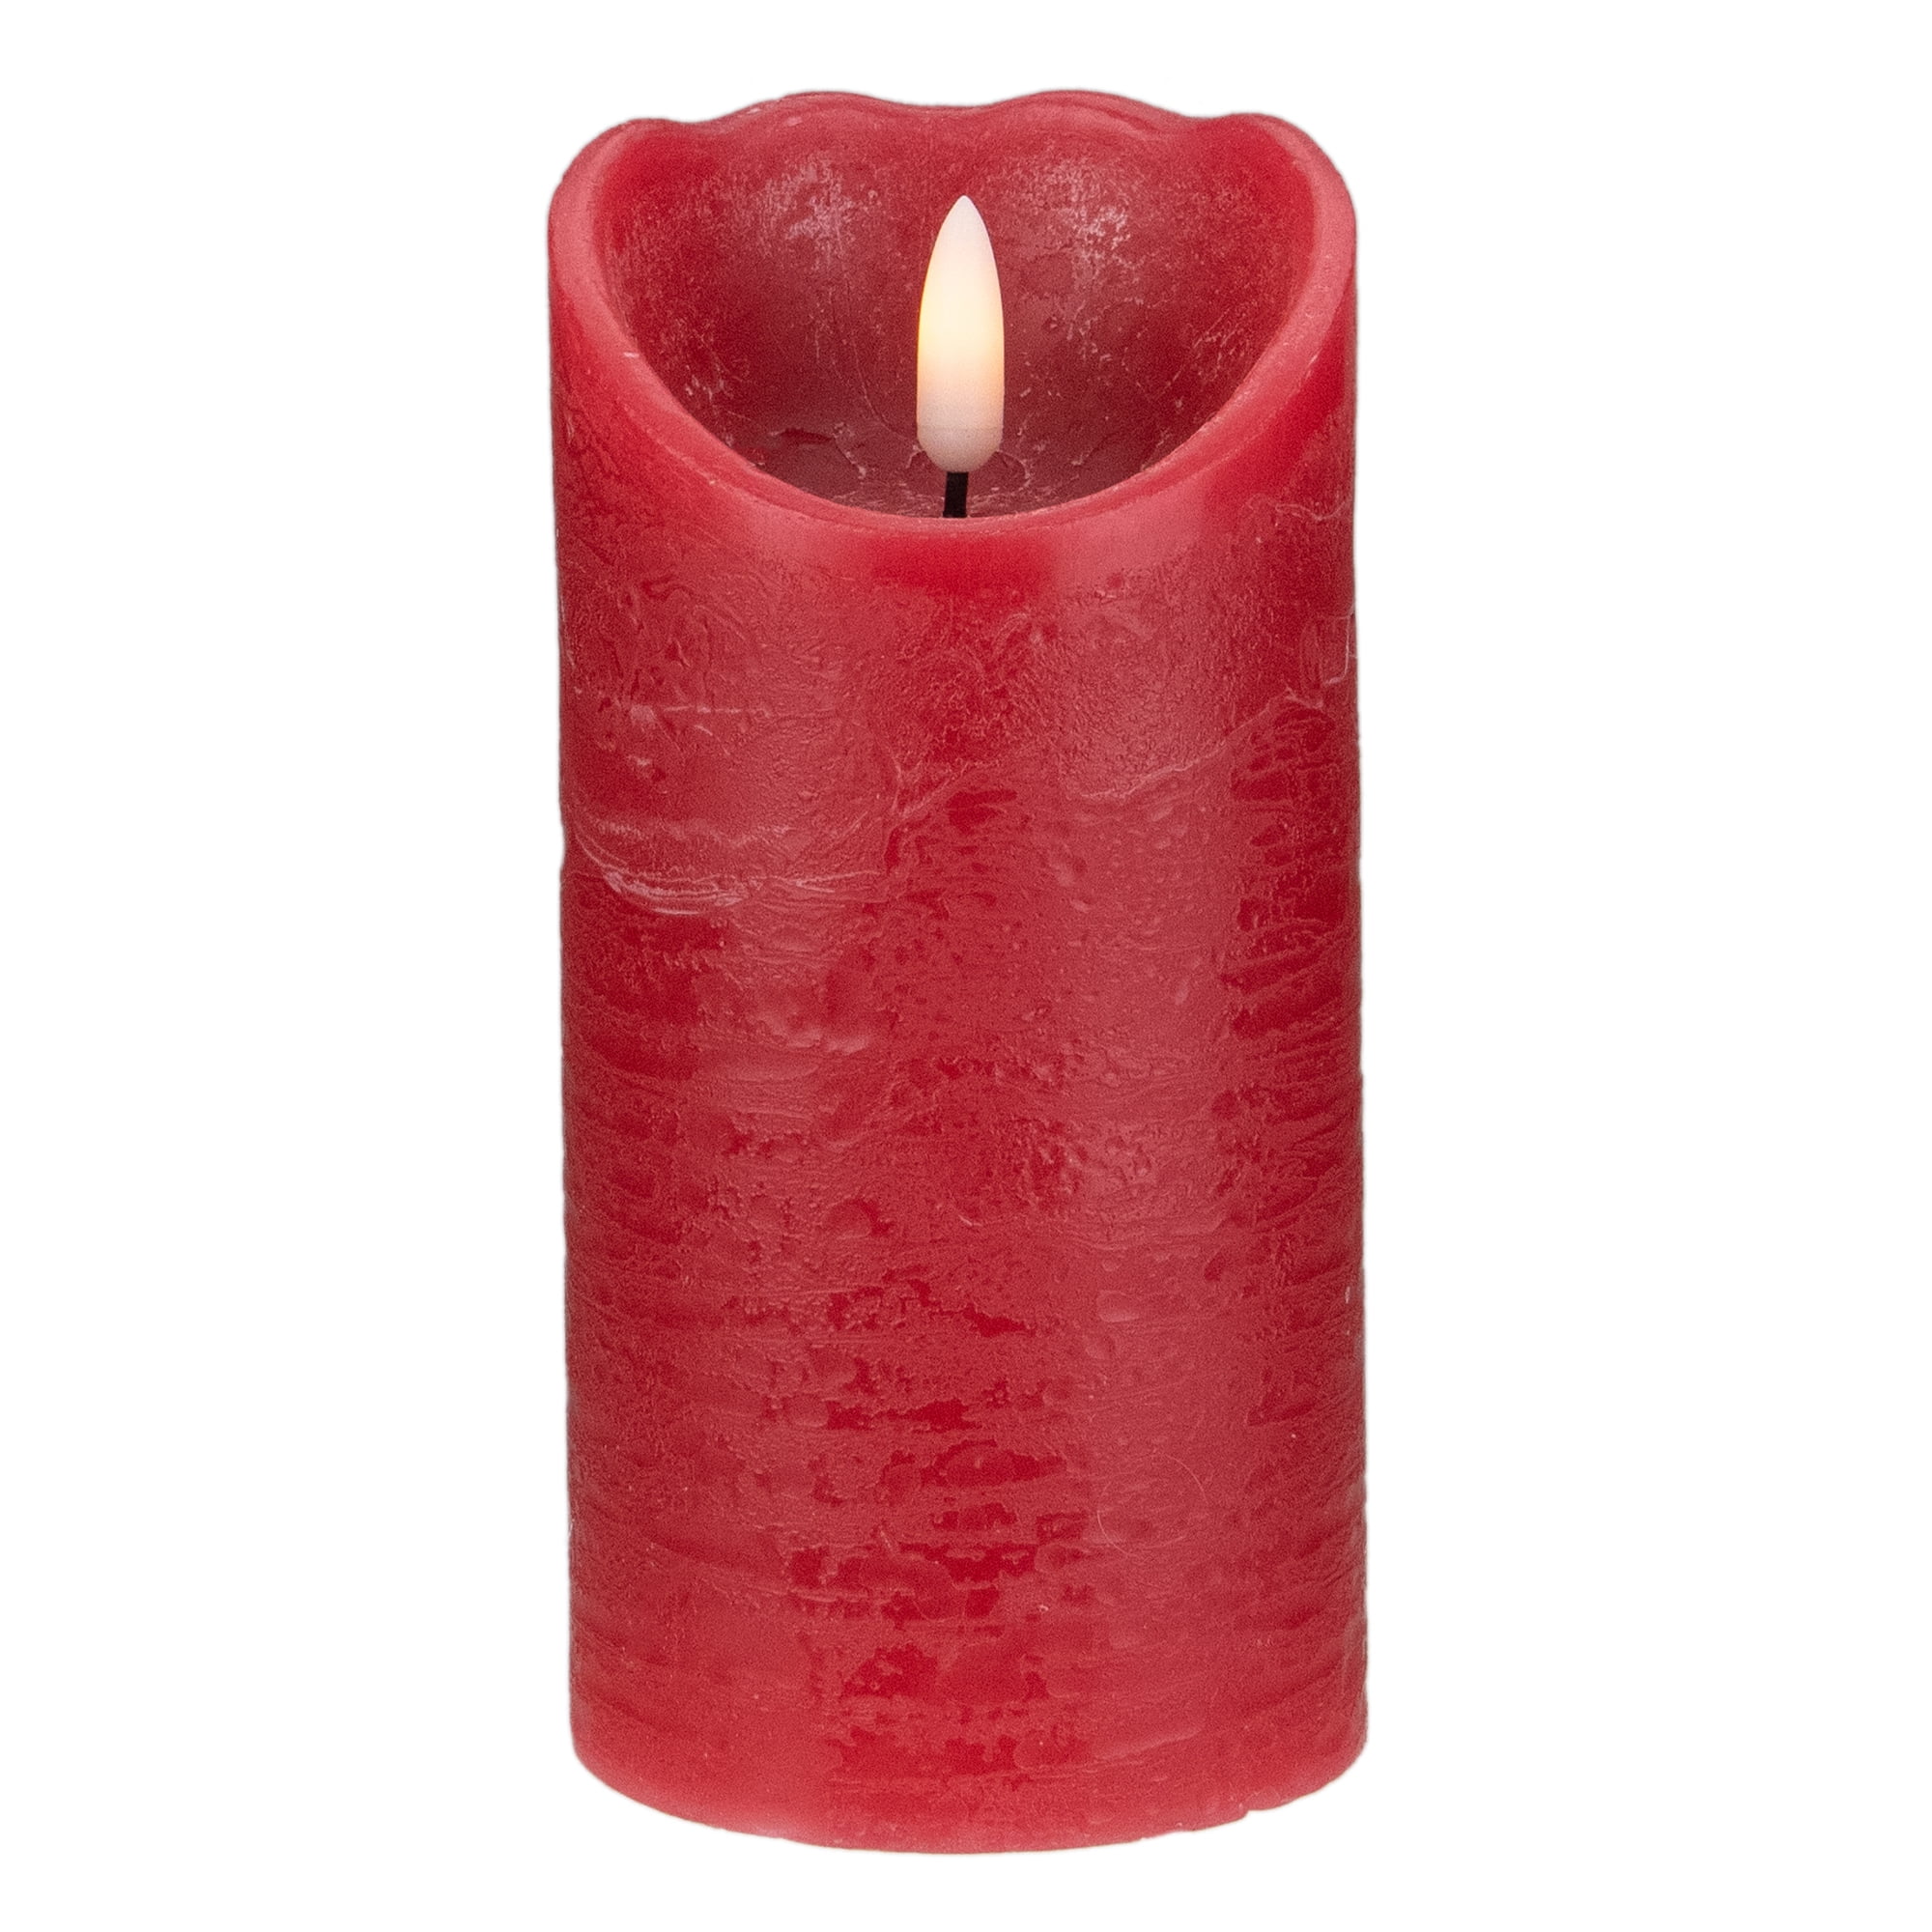 Luminara 7 inch Flameless Candle with Choice of Scent Cartridge Embers 